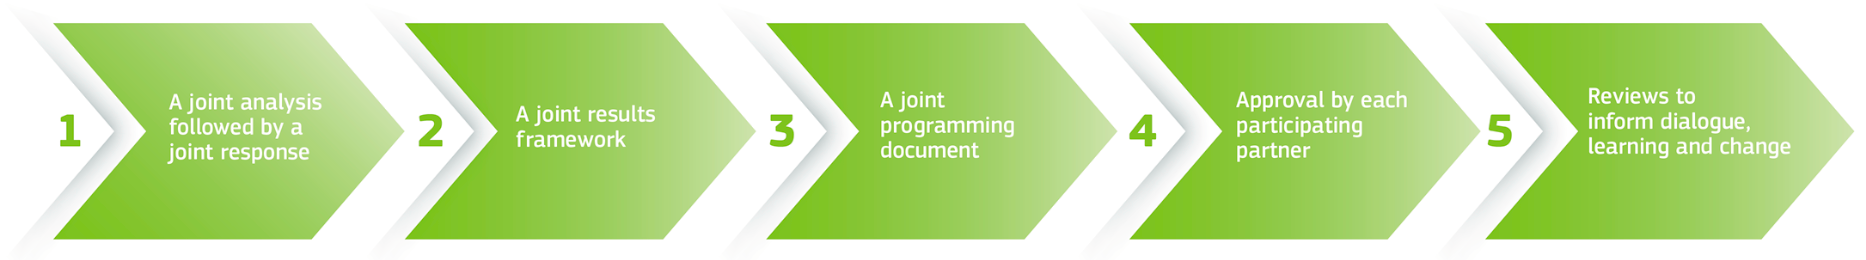 Key Phases Of Join Programming